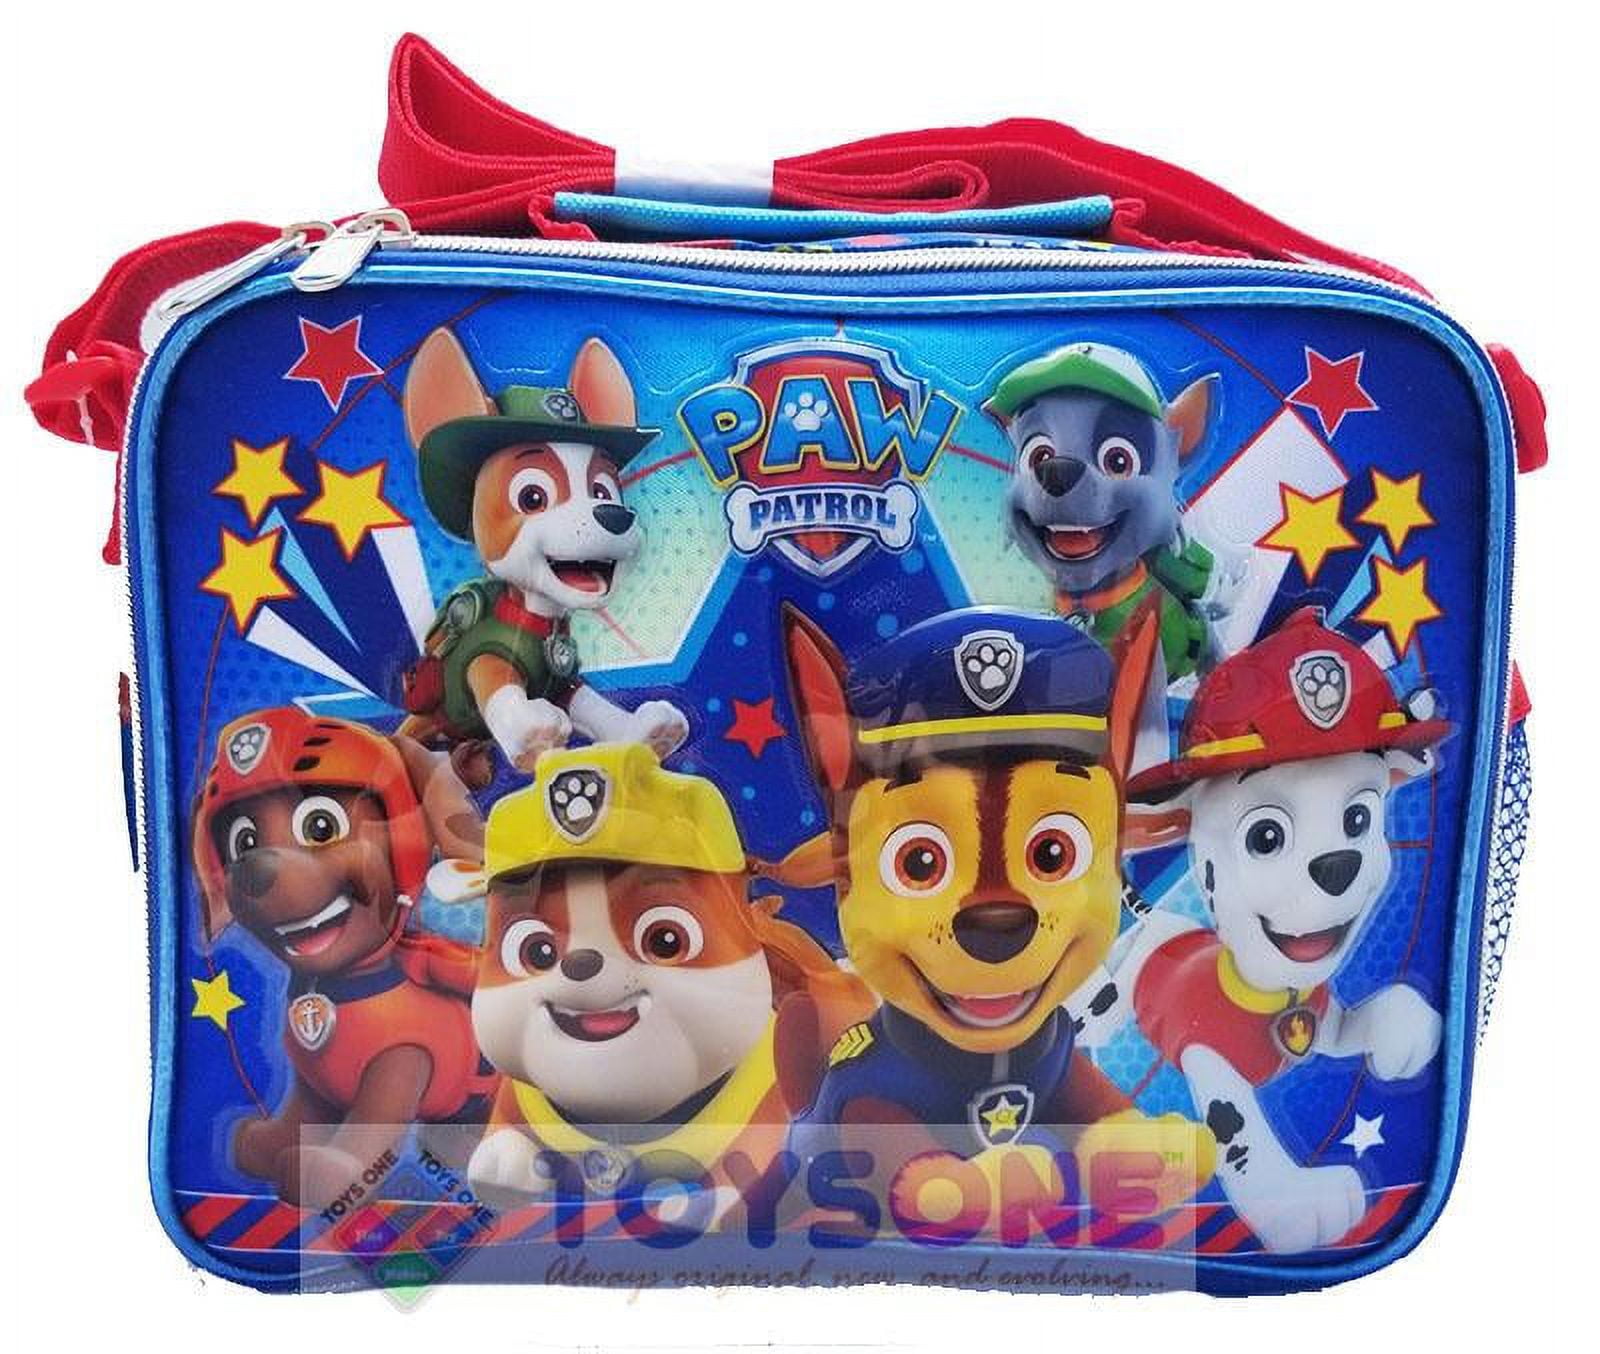 Paw Pup Patrol Lunch Box Kit for Kids Includes Plastic Snacks Storage and Sandwich Container BPA-Free, Dishwasher Safe Toddler-Friendly Lunch